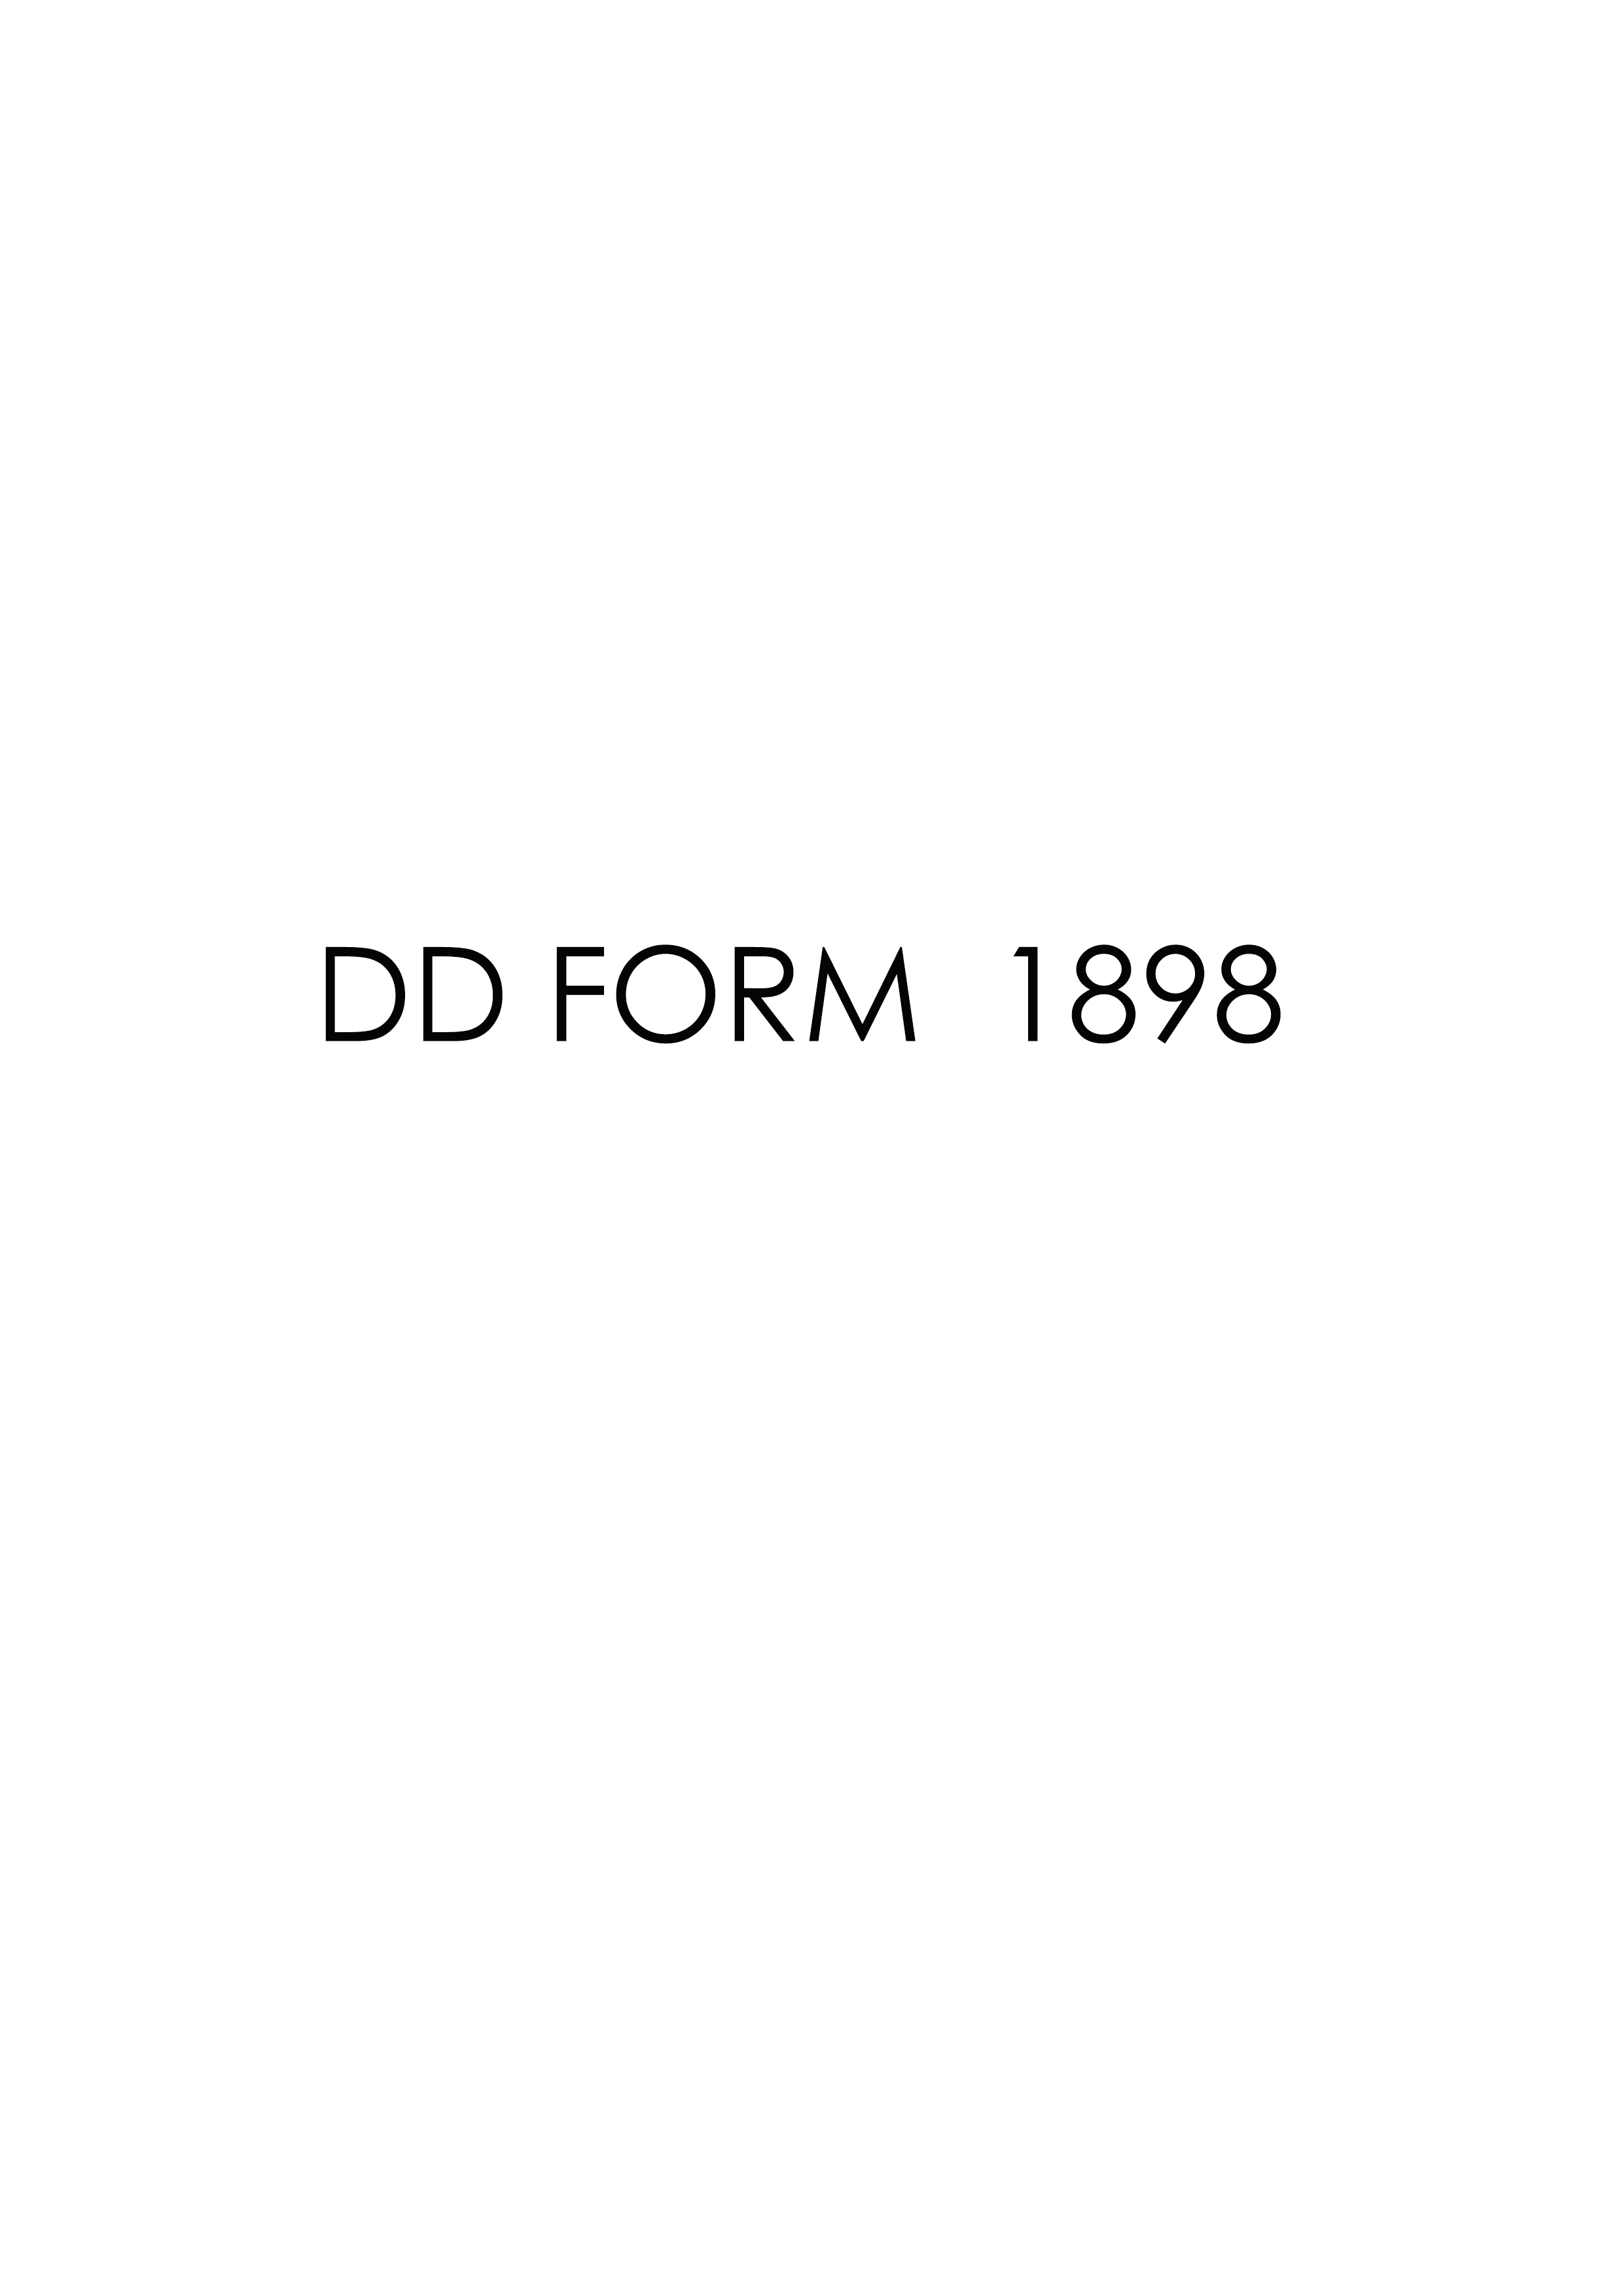 Download Fillable dd Form 1898